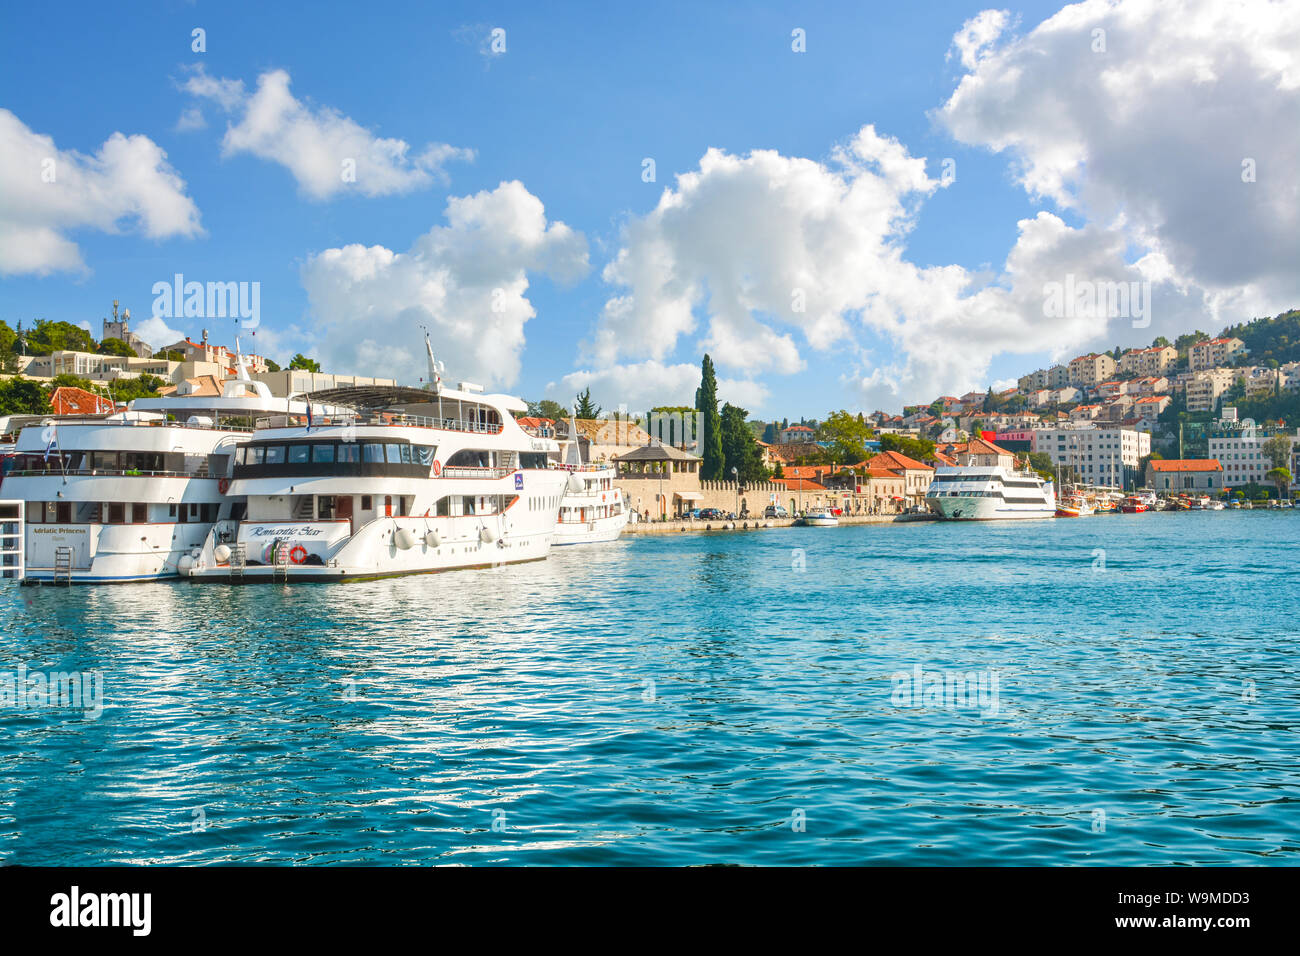 Boats line up at the pier and boardwalk in the harbor of Dubrovnik, on the Dalmatian coast of Croatia. Stock Photo